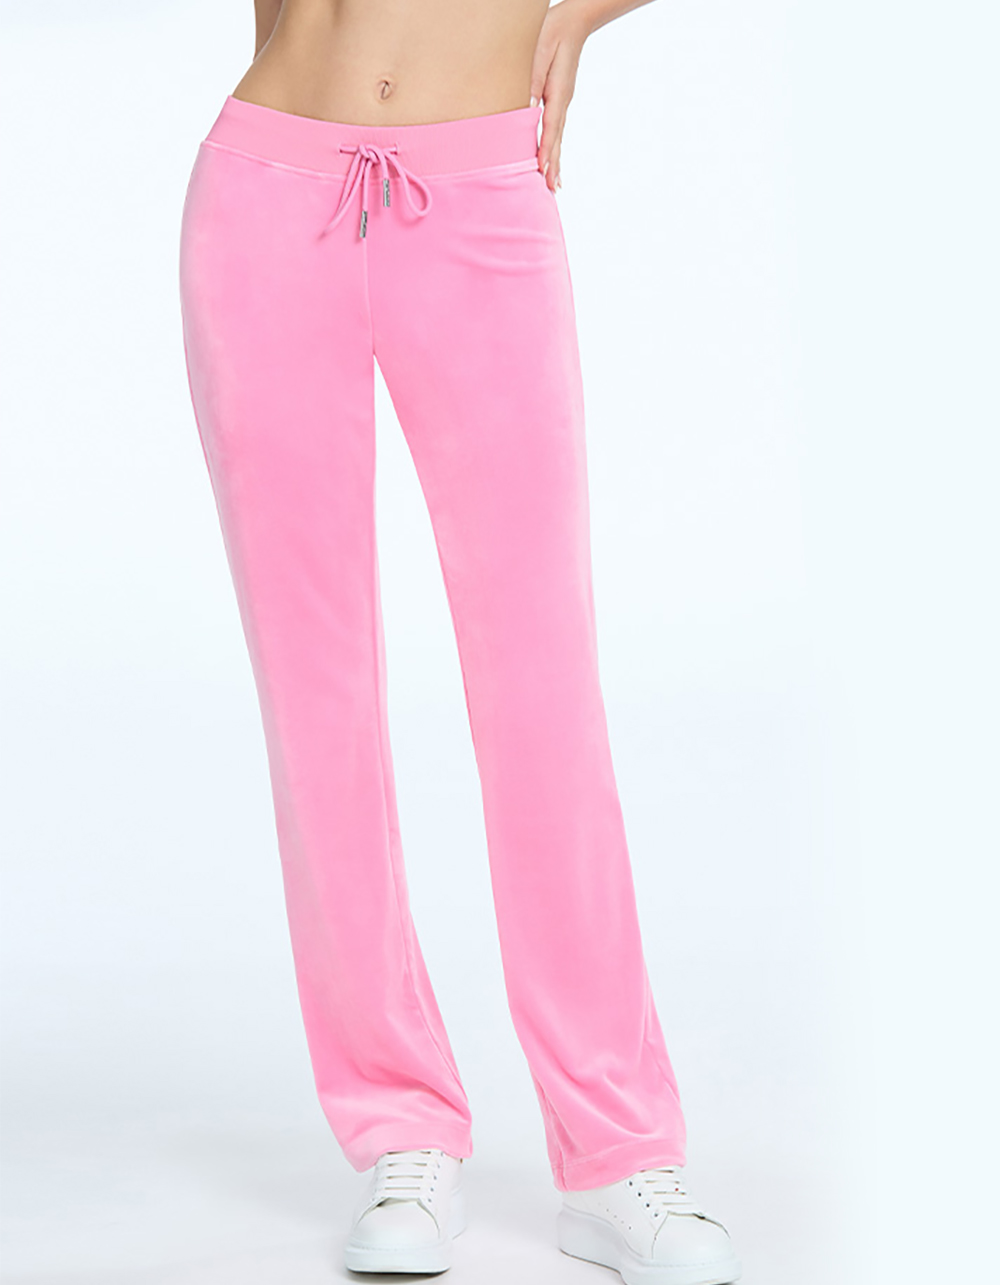 Juicy Couture Embellished Velour Track Pant  Juicy tracksuit, Pink juicy couture  track suit, Juicy couture track suit